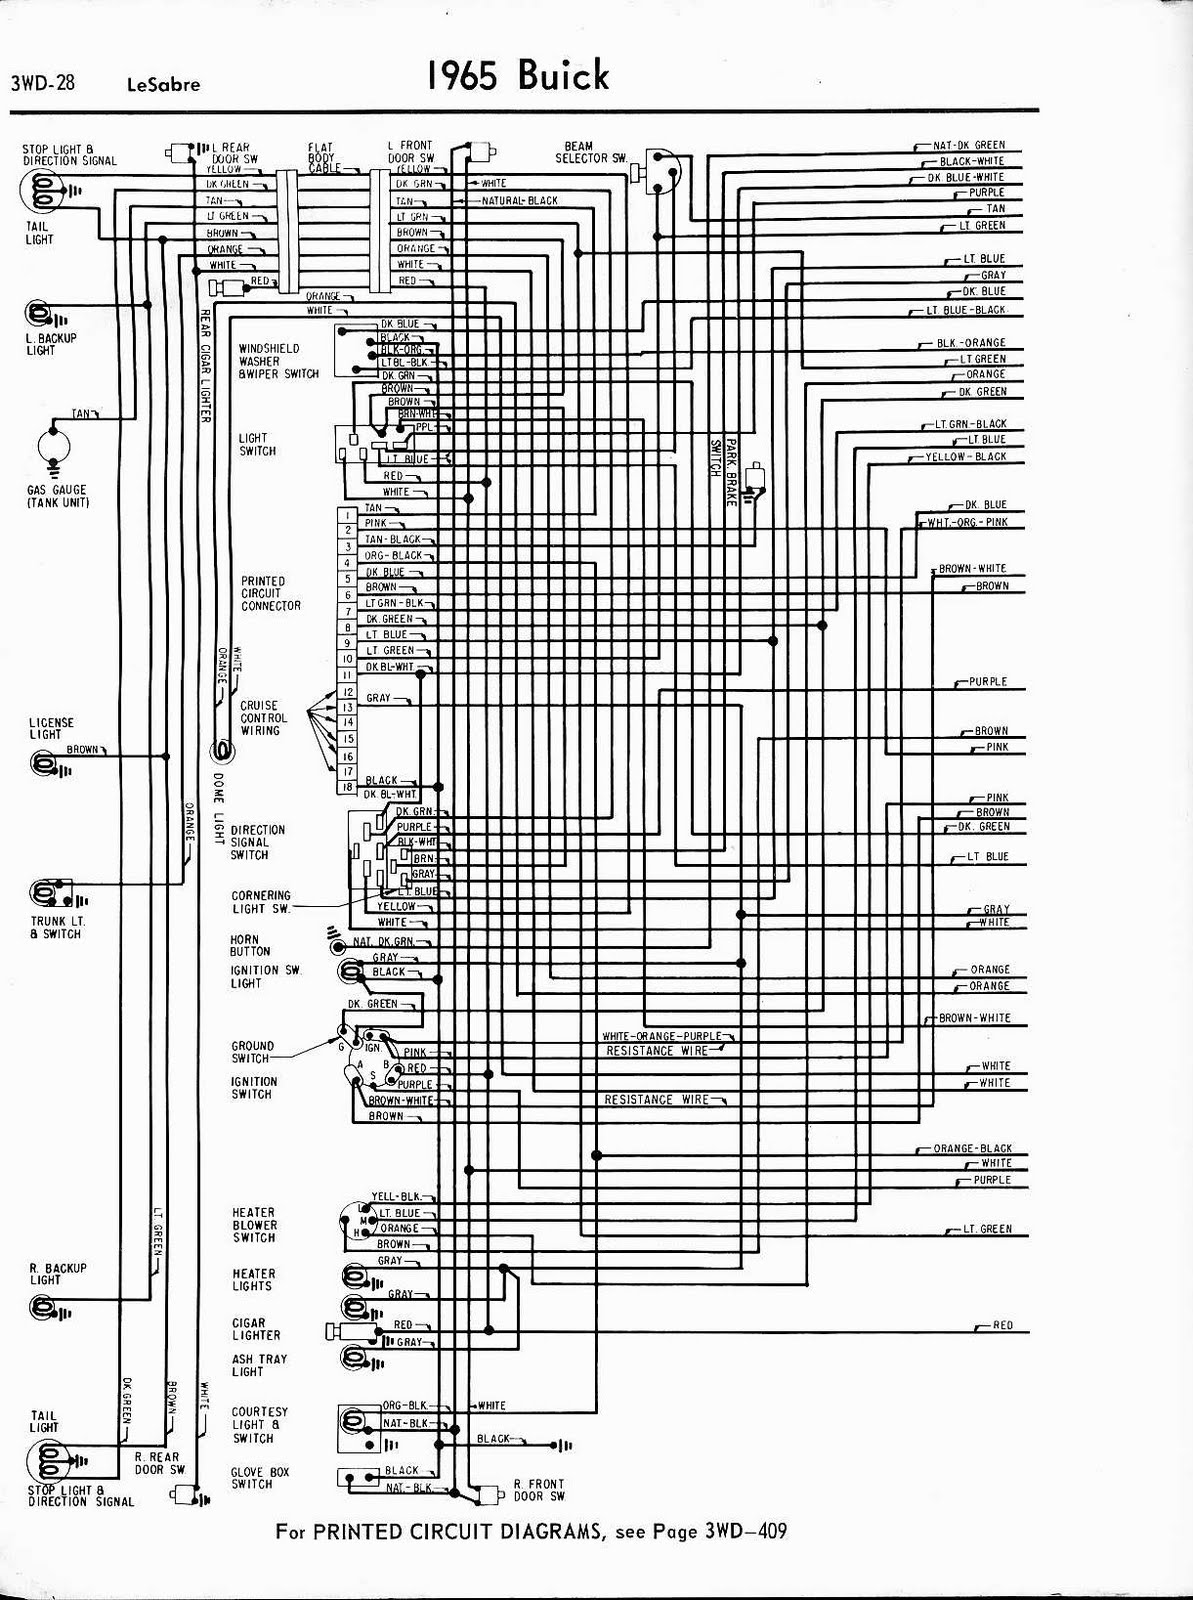 Free Auto Wiring Diagram: 1965 Buick LeSabre Back Side 1959 buick lesabre wiring diagram 